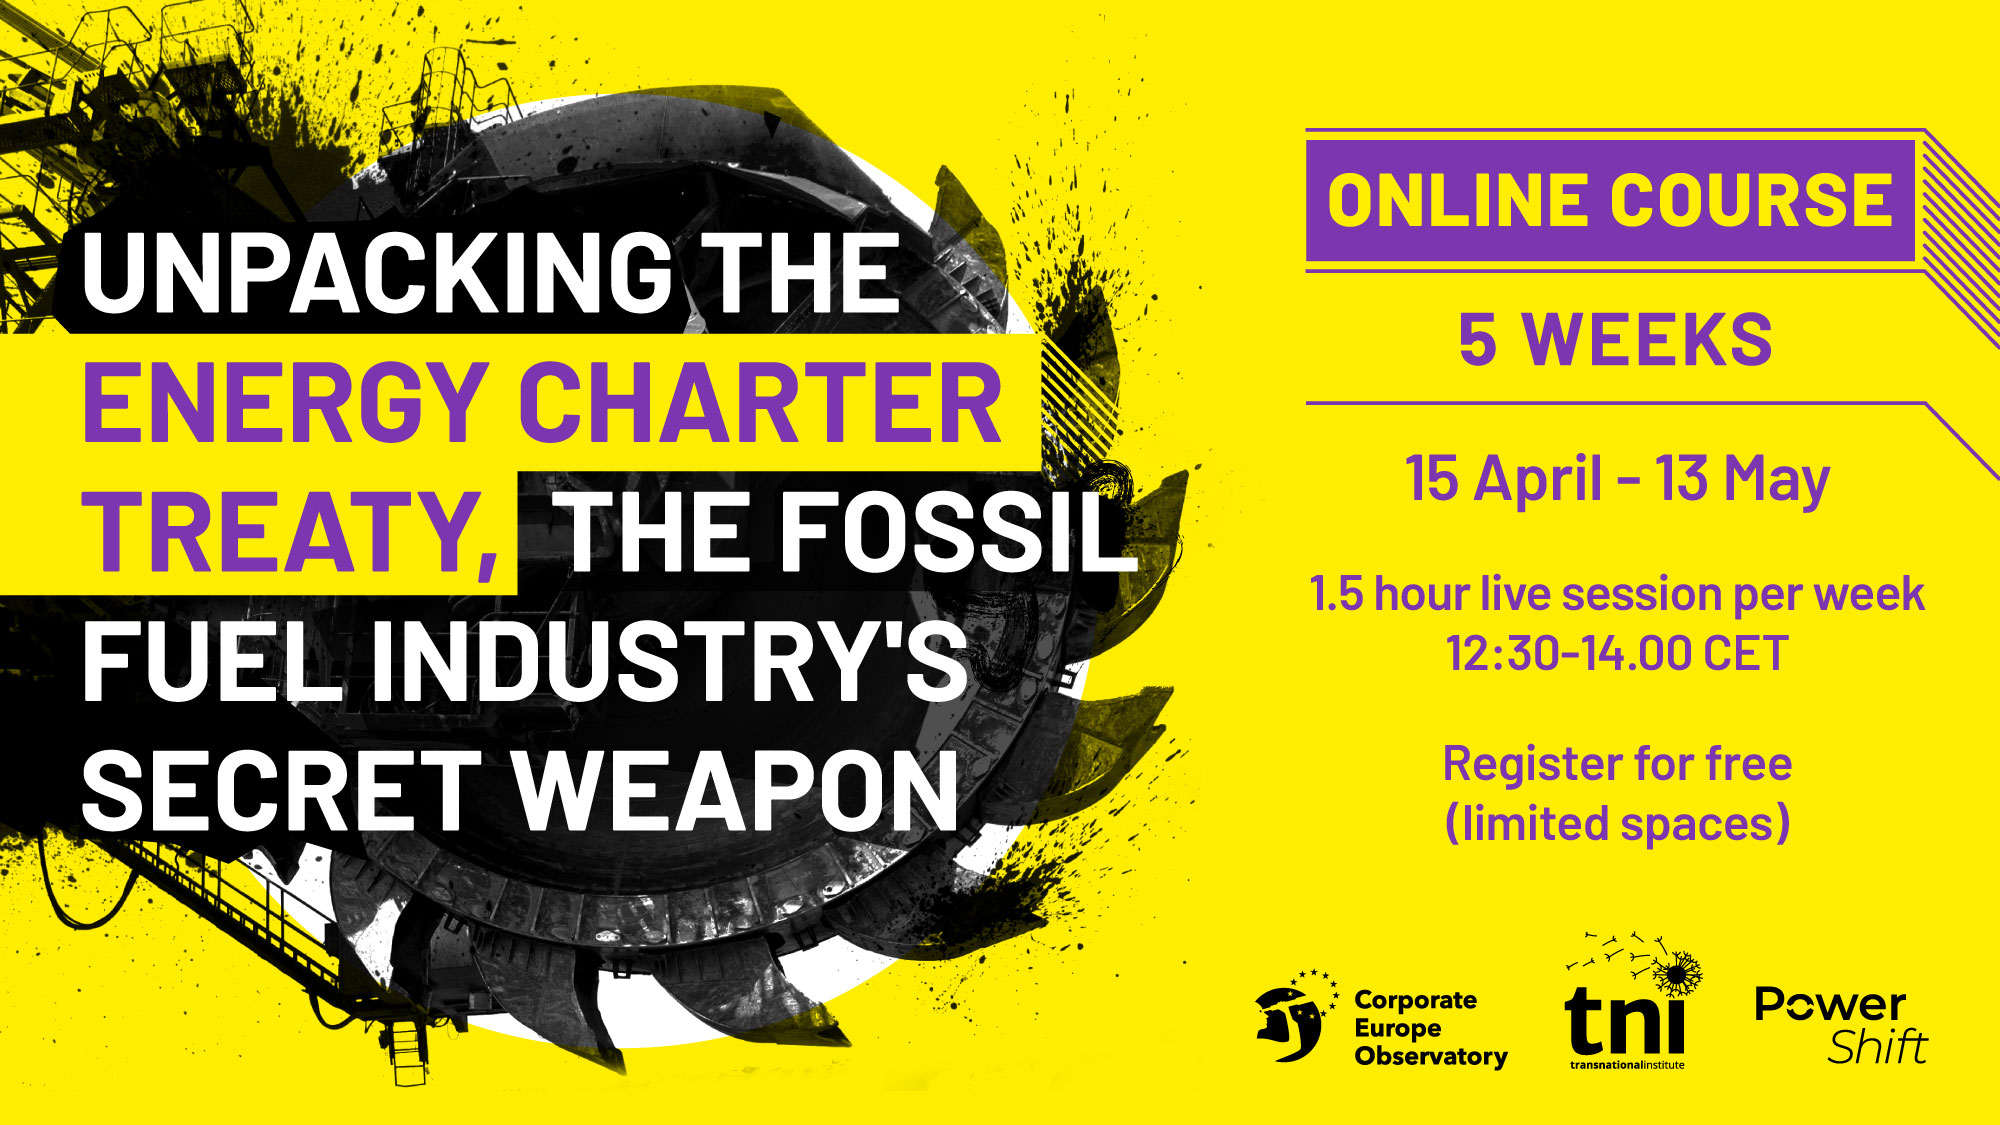 [Online Course] Unpacking the Energy Charter Treaty, the fossil fuel industry’s secret weapon